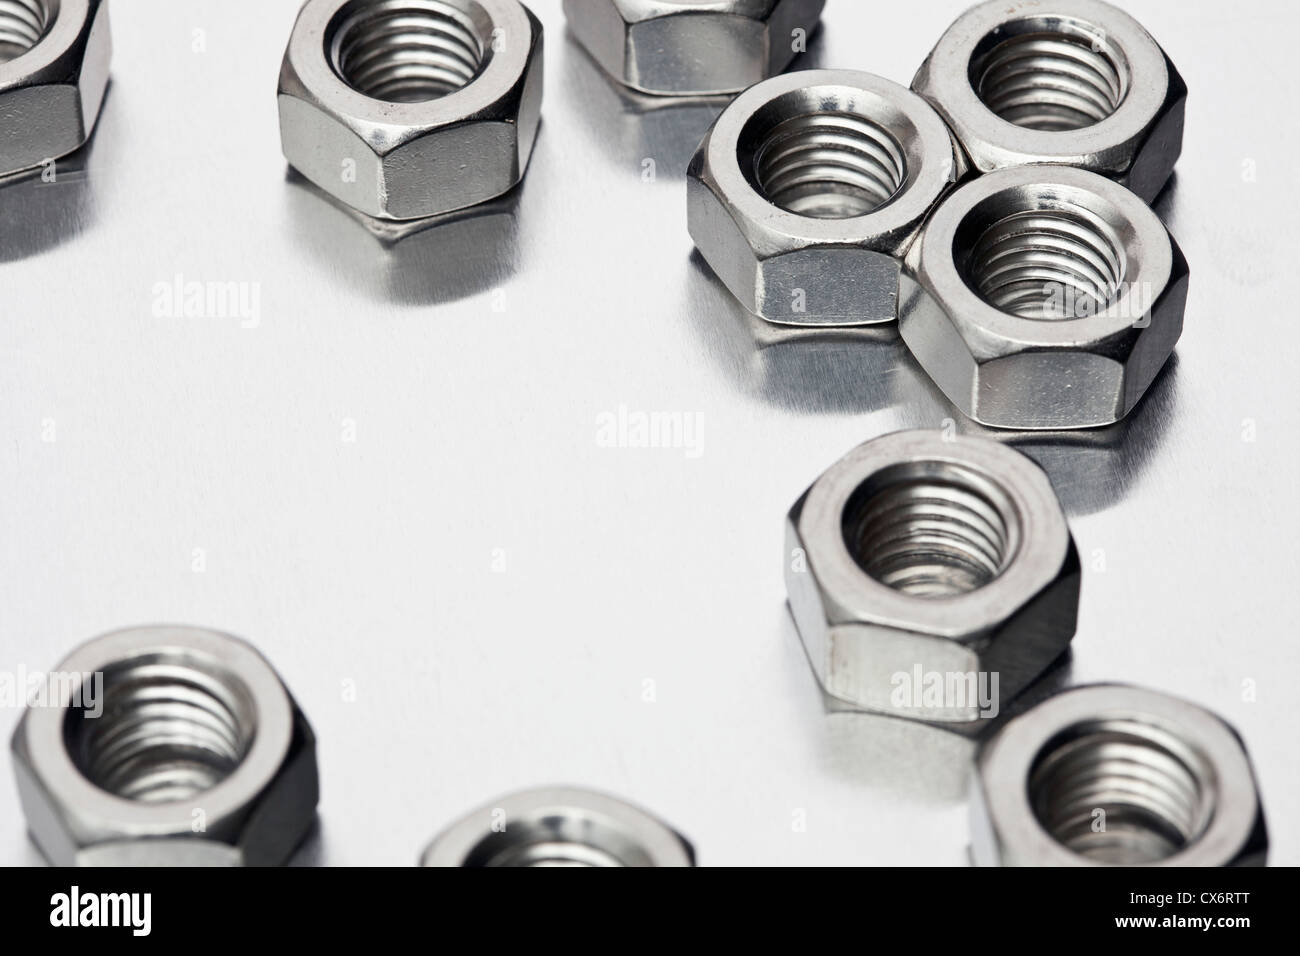 Shiny metal nuts on a reflective surface Stock Photo